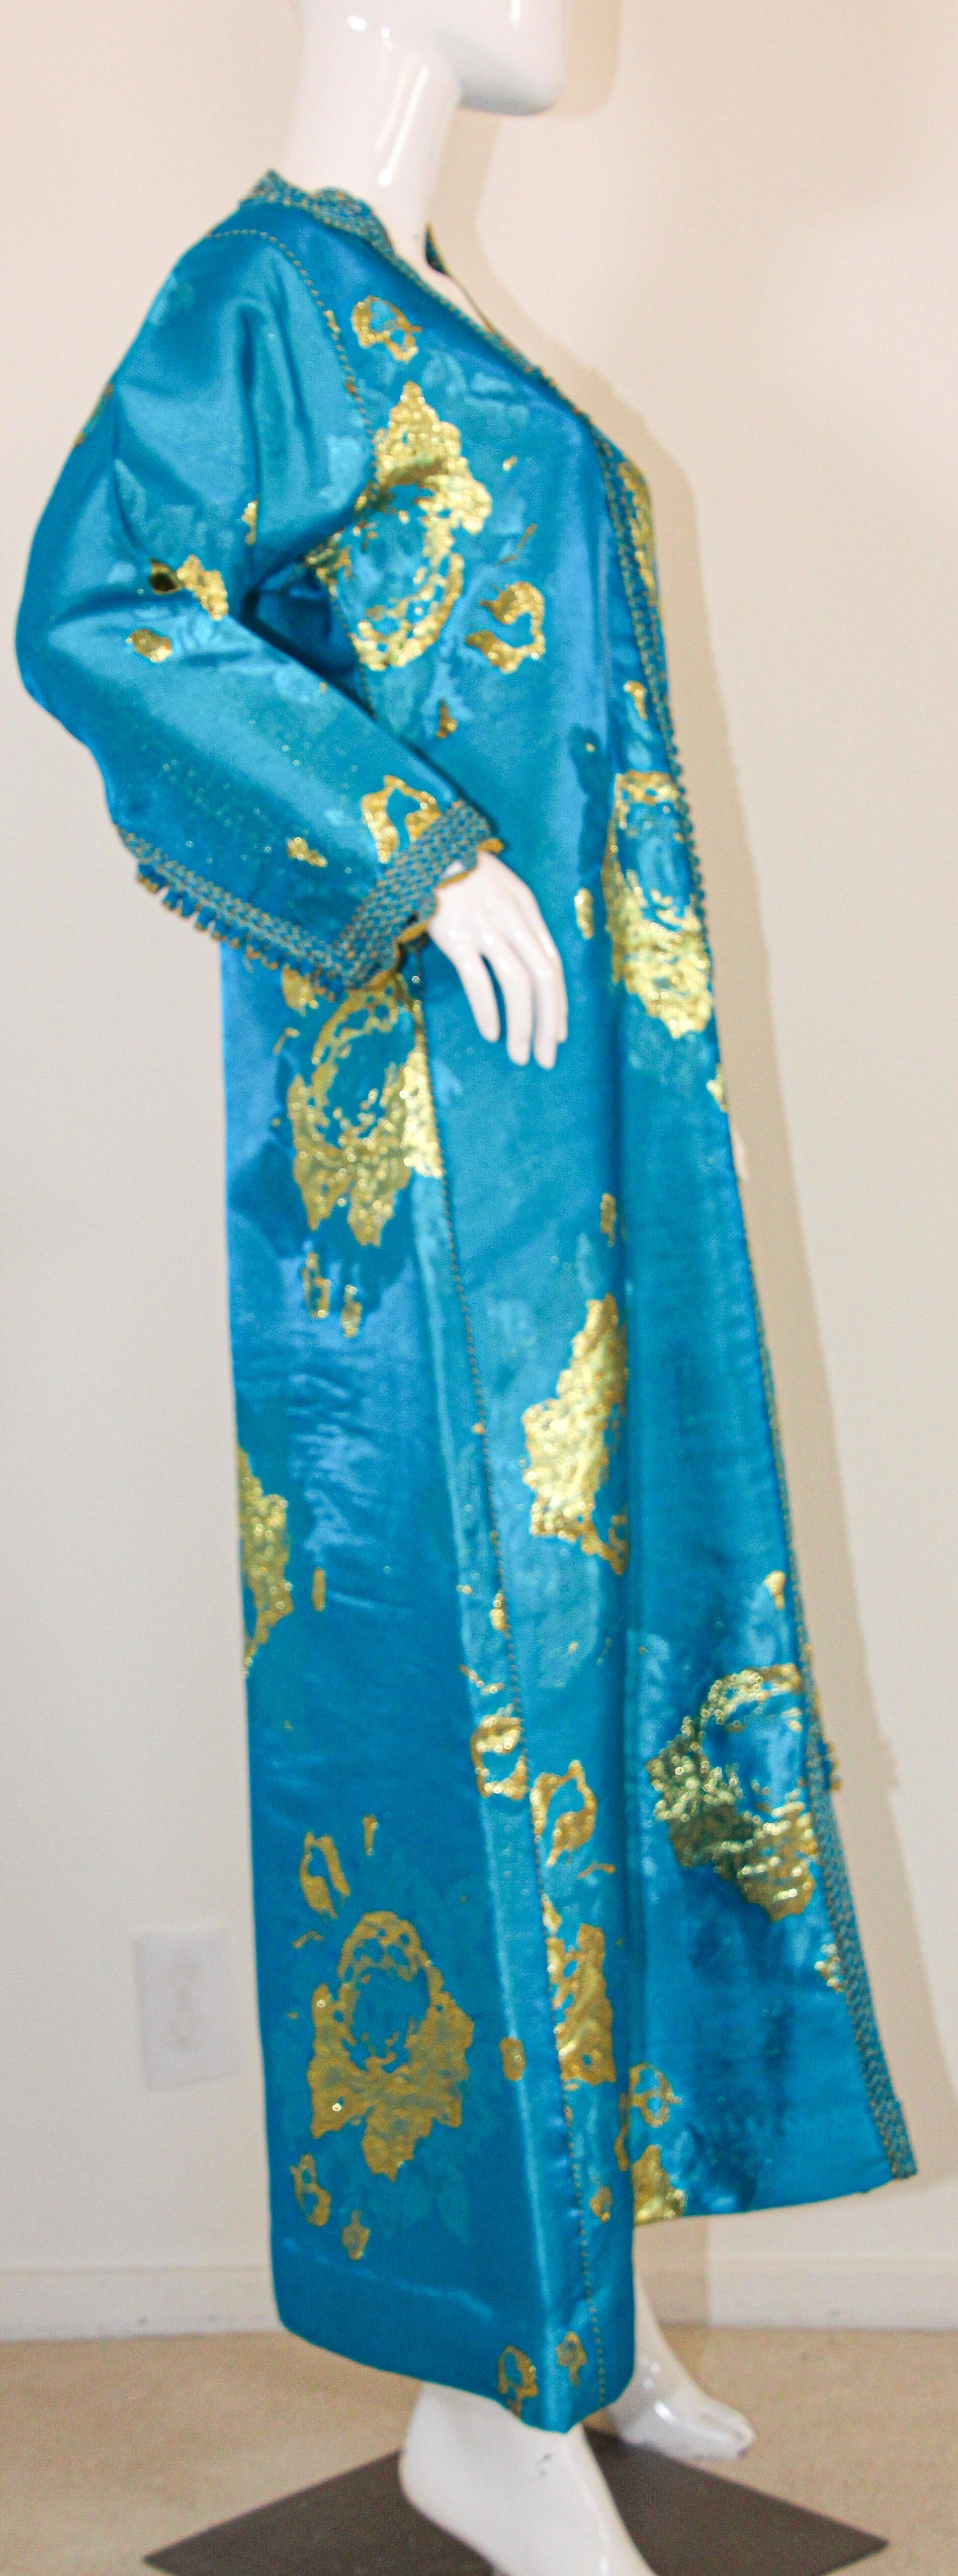 Moroccan Kaftan in Turquoise and Gold Floral Brocade Metallic Lame 8